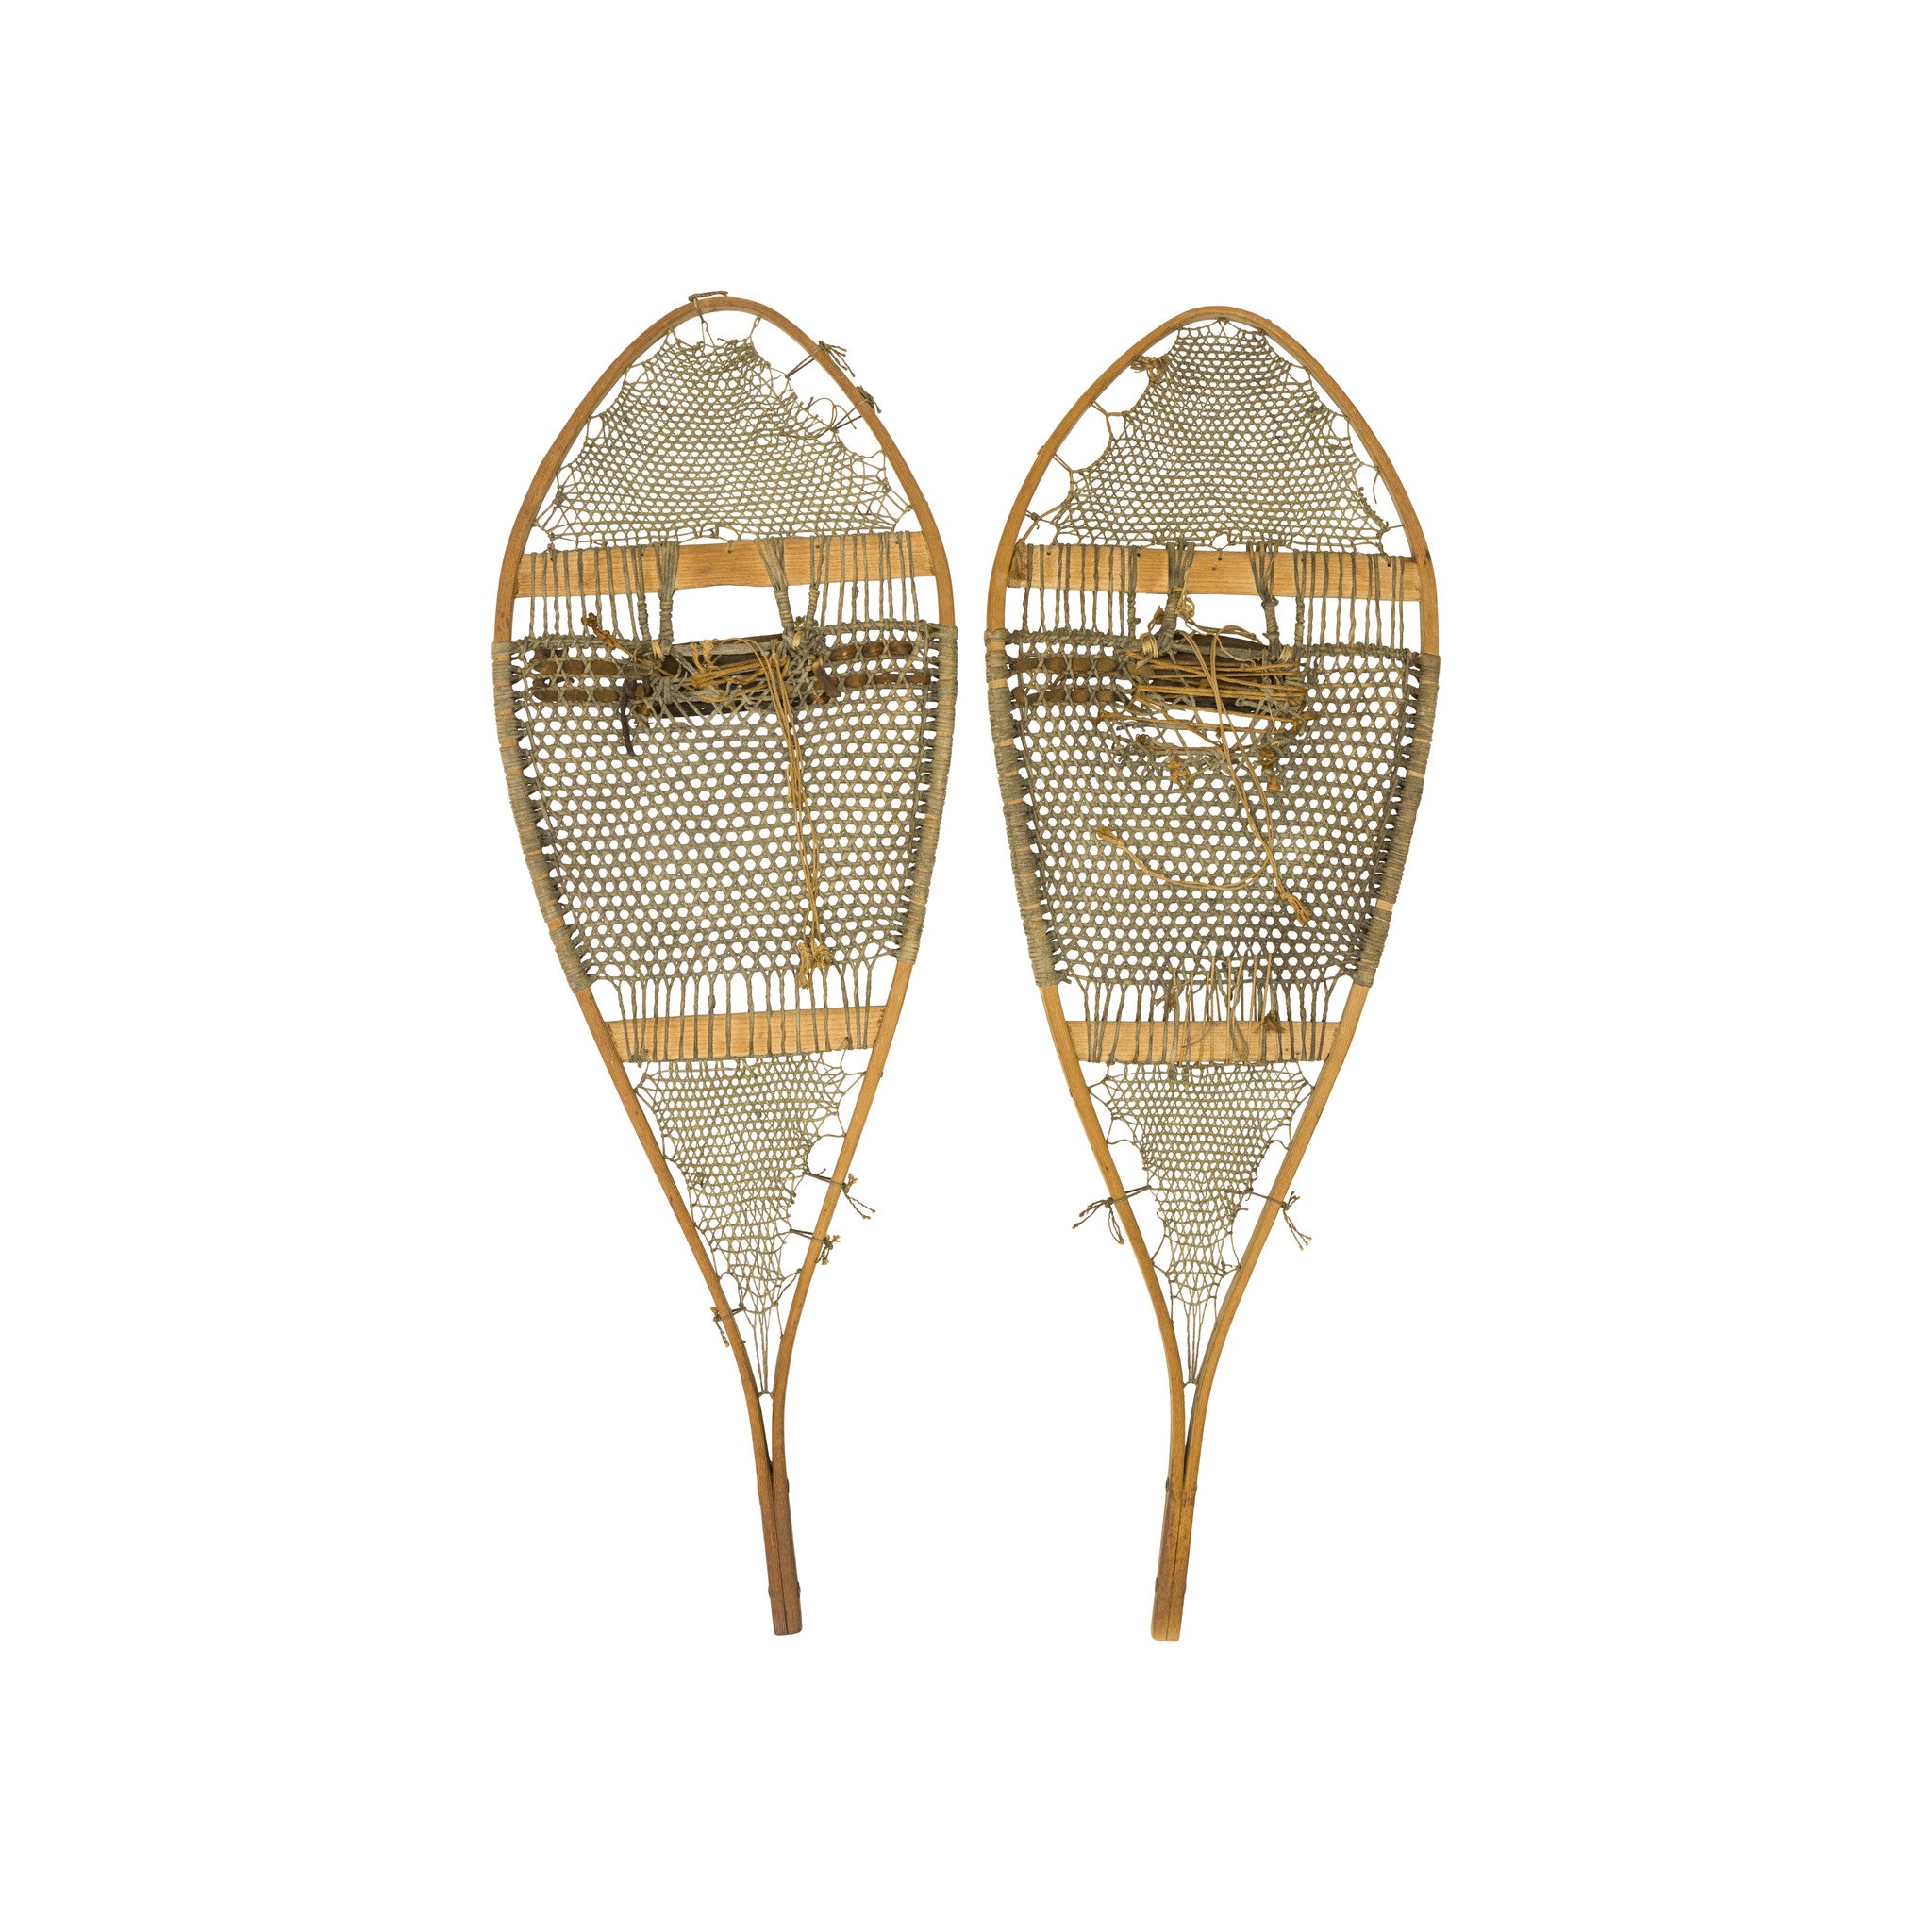 Snowshoes by The Main Snow - Shoe Co.